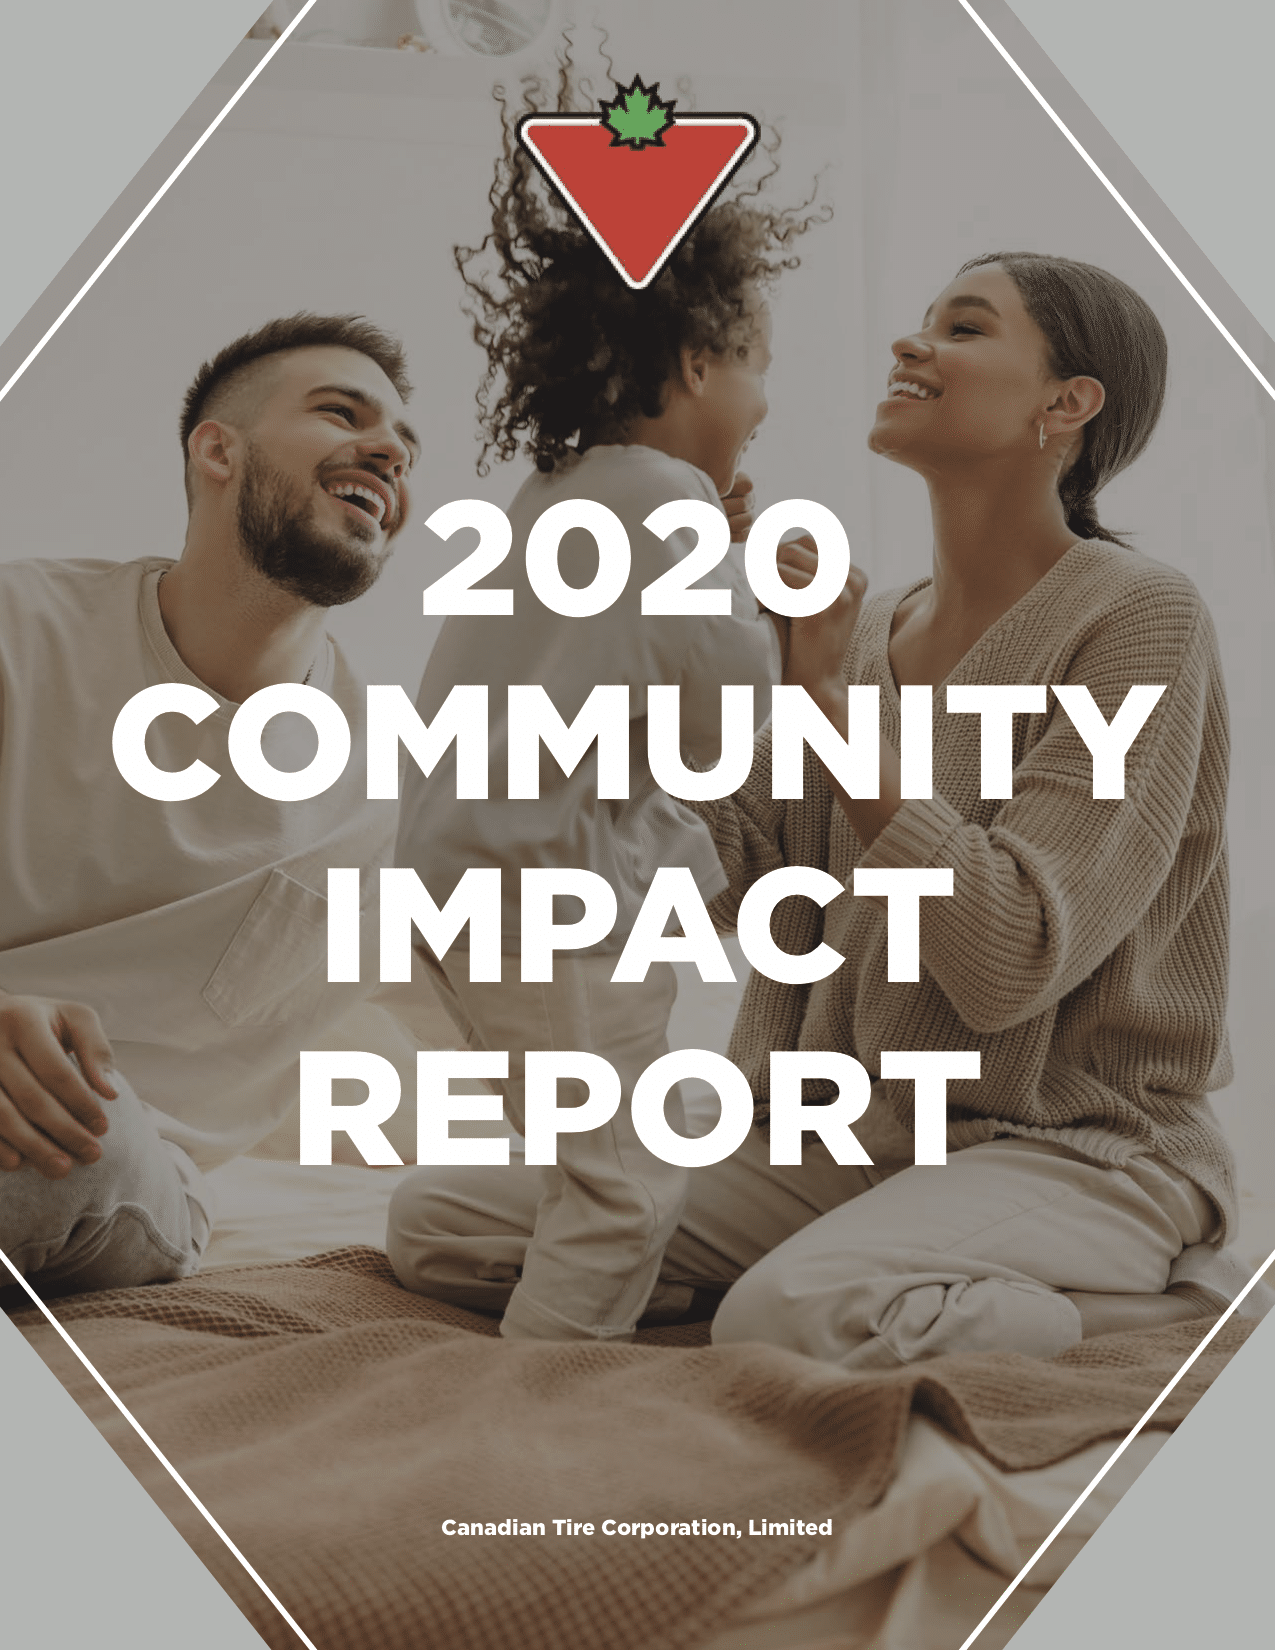 A mother, father and small child playing in the background. Over top, the Canadian Tire logo is above text that reads, "2020 Community Impact Report" by Canadian Tire Corporation, Limited